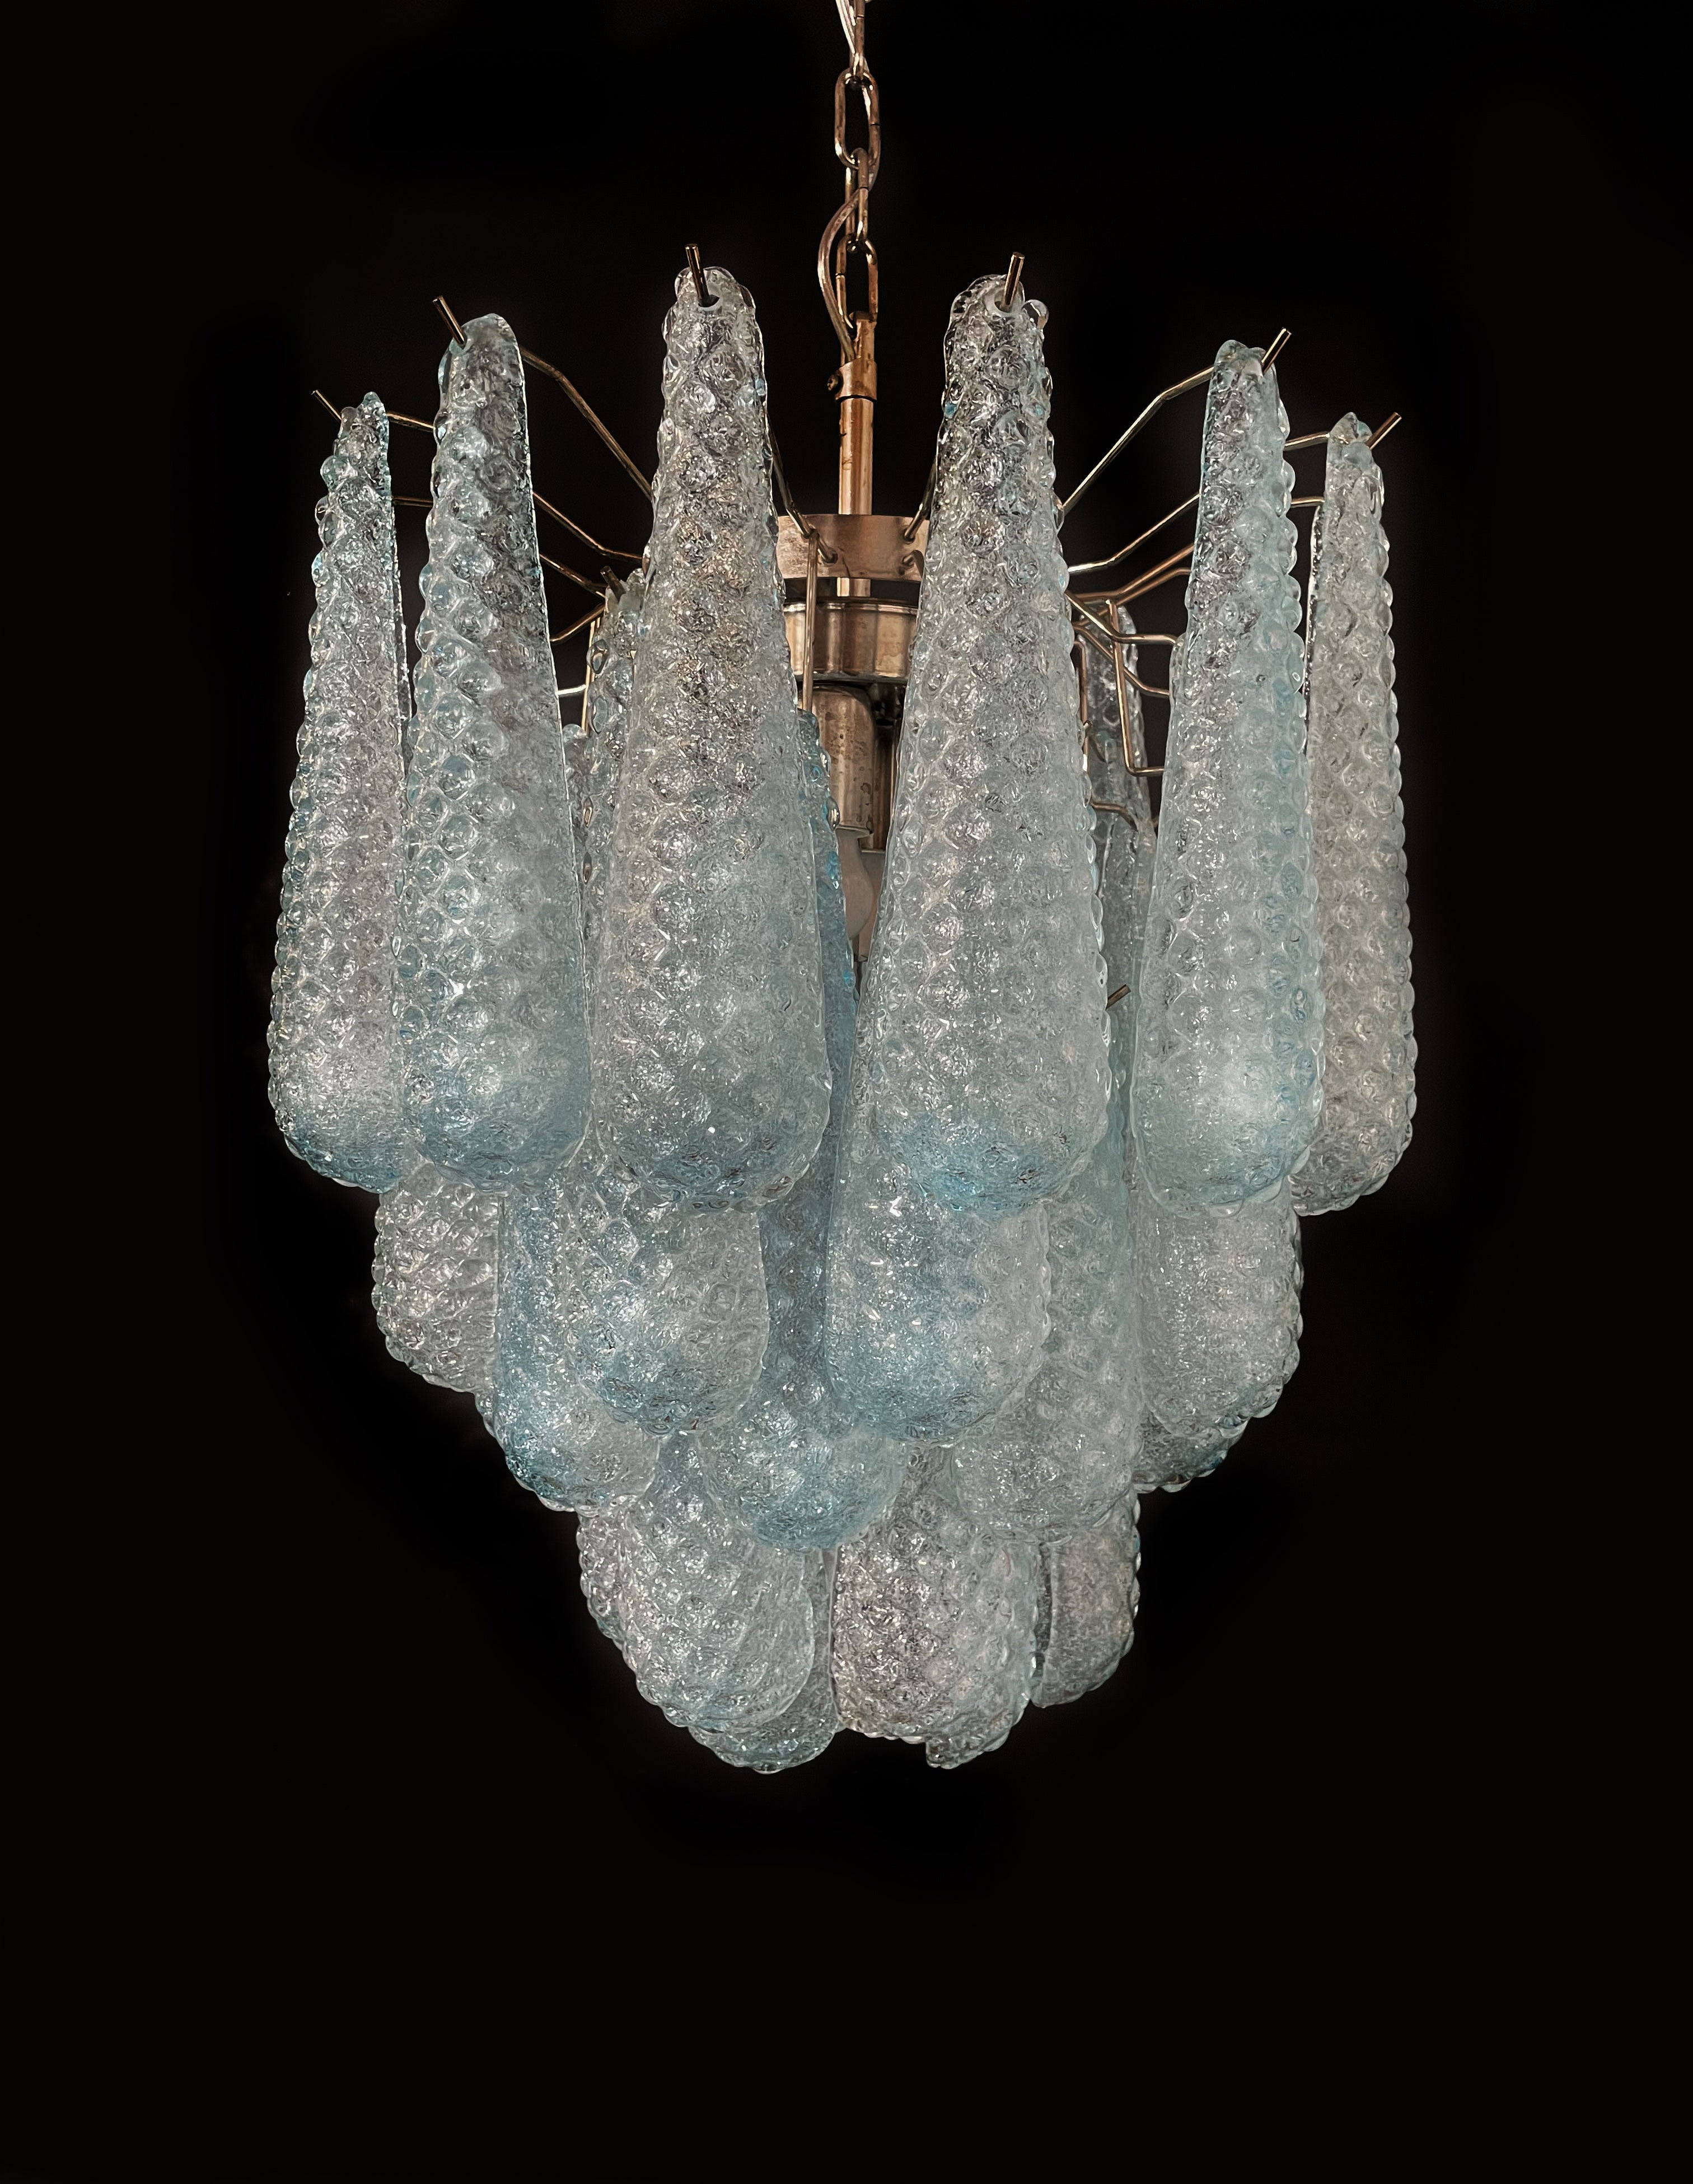 Pair Italian vintage Murano chandeliers made by 41 glass petals (light blue crystal, smooth outside, with powder and then rough inside.) in a chrome frame.
Period: late 20th century
Dimensions: 49,20 inches (125 cm) height with chain; 25,80 inches